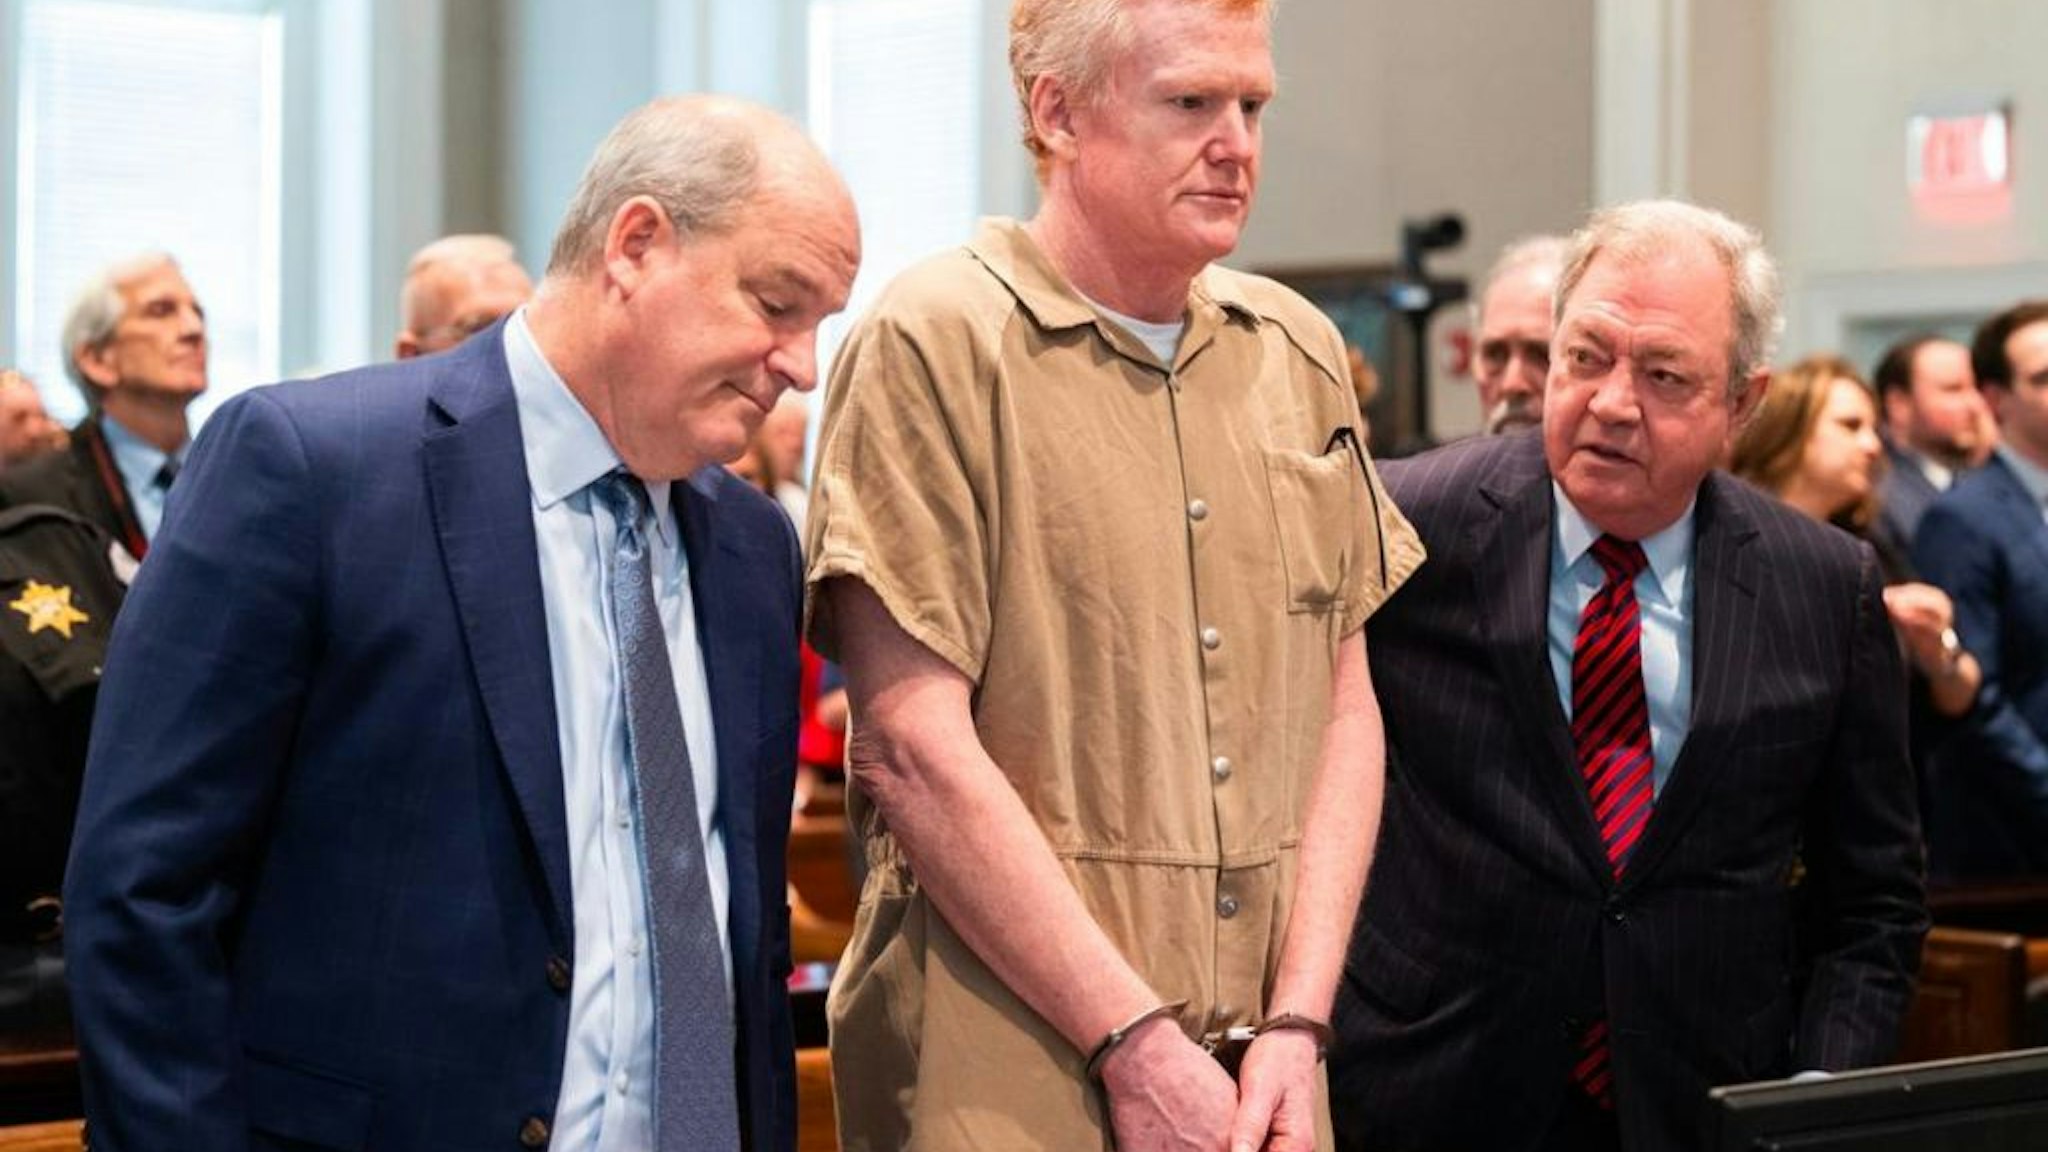 Alex Murdaugh, center, speaks with his legal team before he is sentenced to two consecutive life sentences for the murder of his wife and son at the Colleton County Courthouse in South Carolina on March 3, 2023.